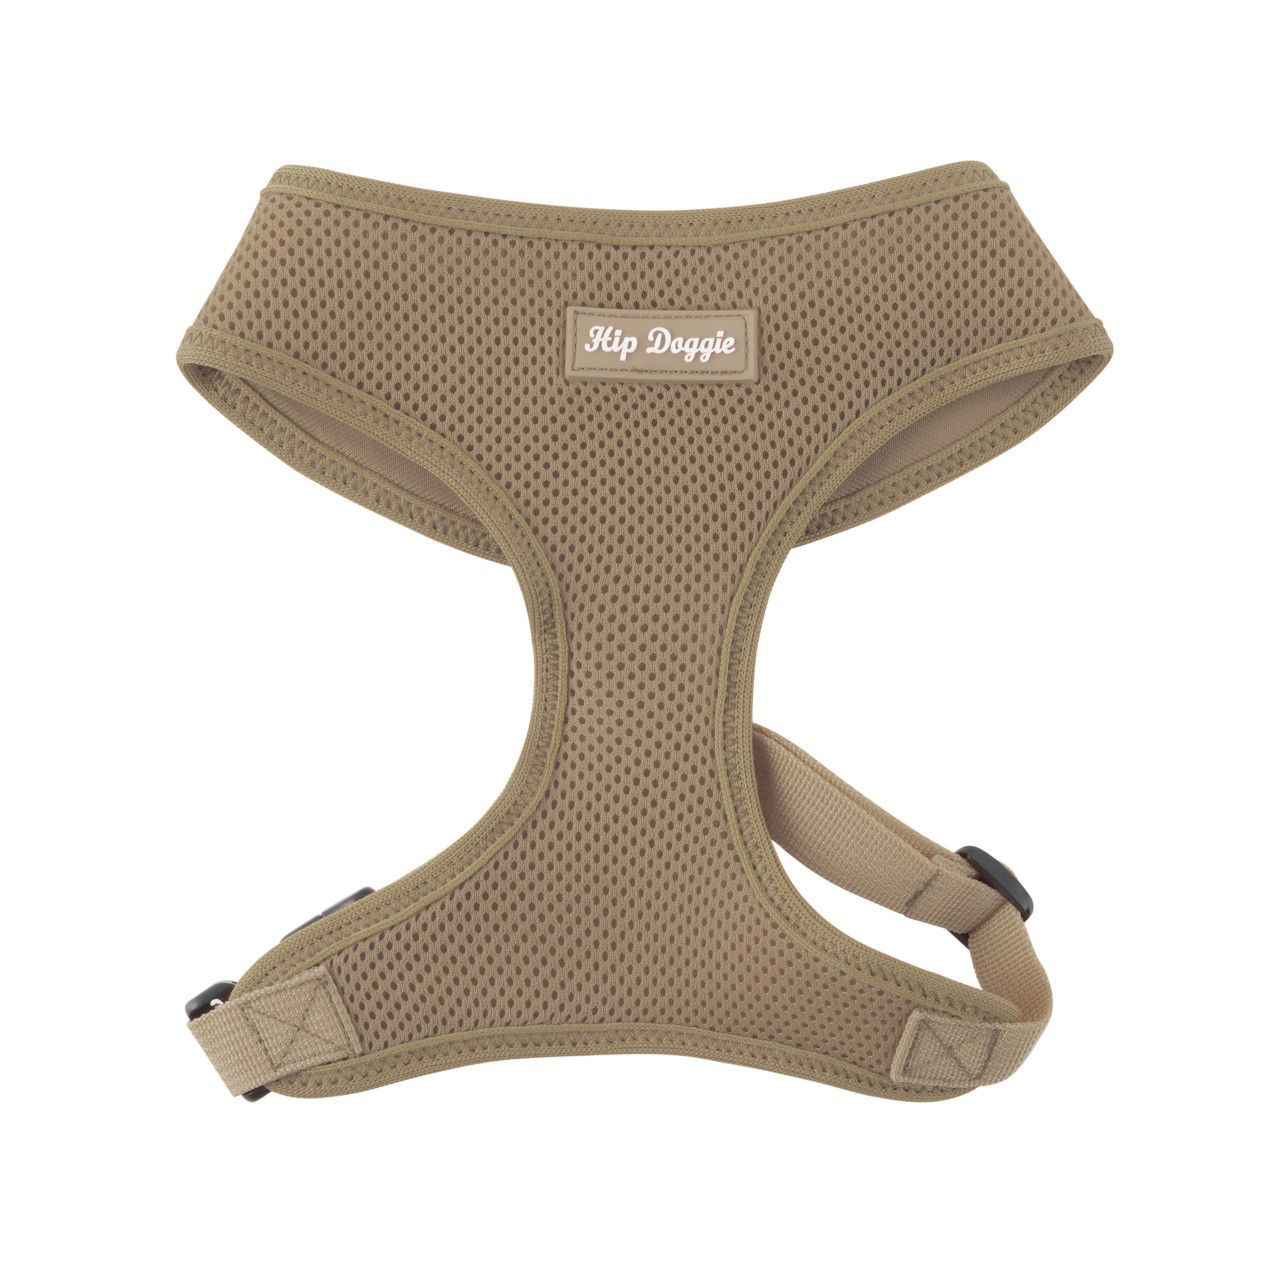 Picture of OLD STYLE - Ultra Comfort Tan Mesh Harness Vest